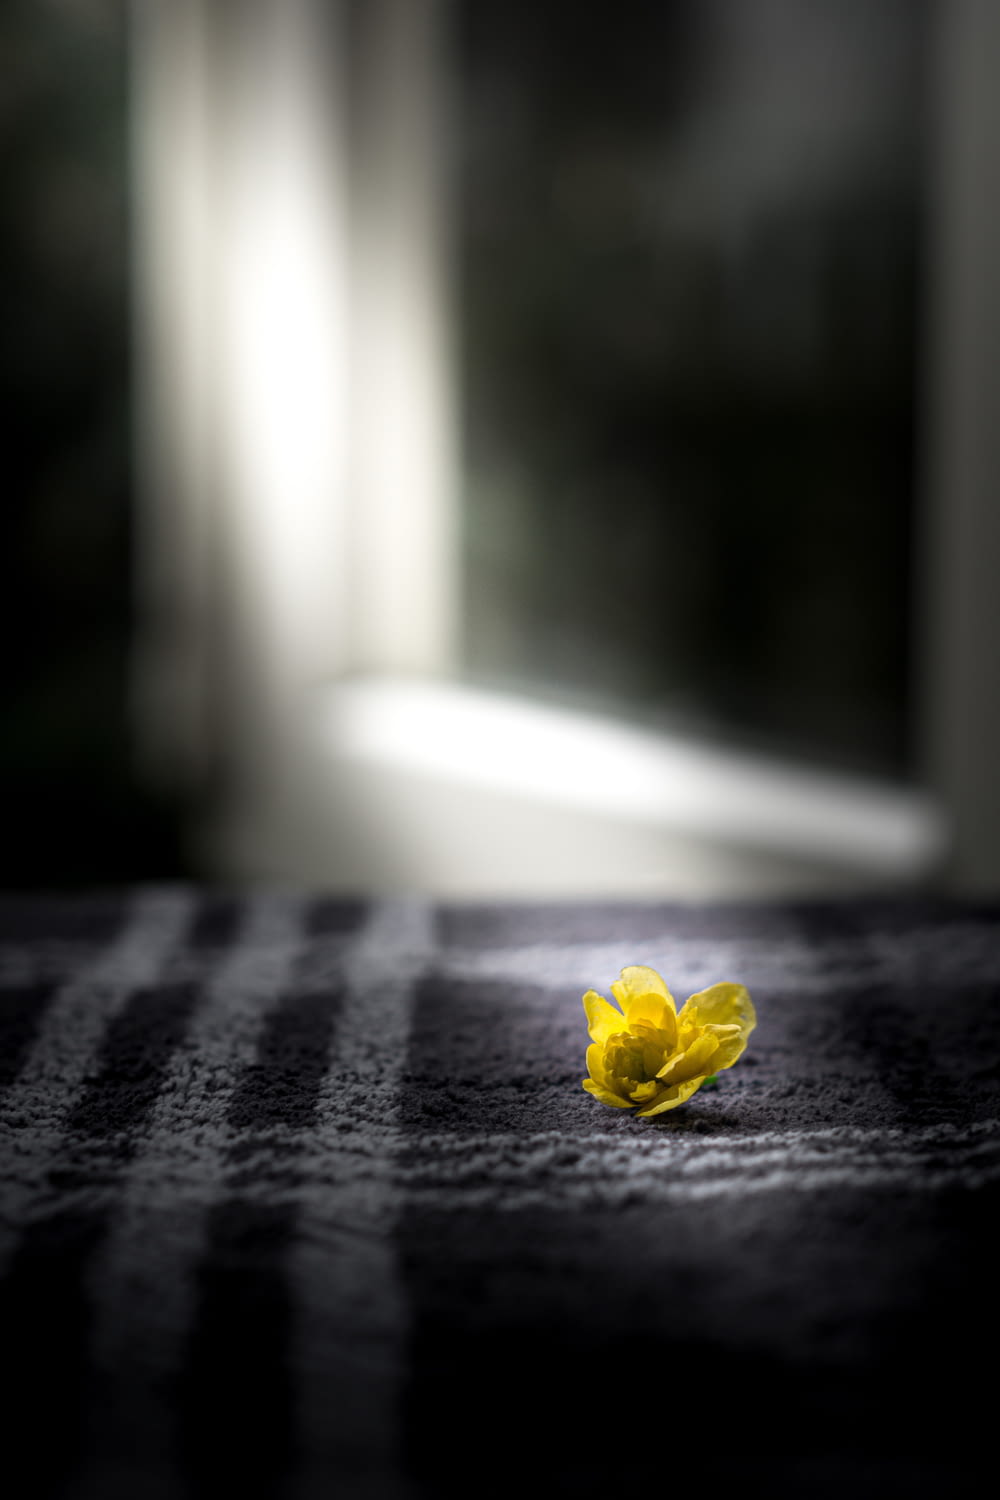 yellow flower on black and white checkered textile